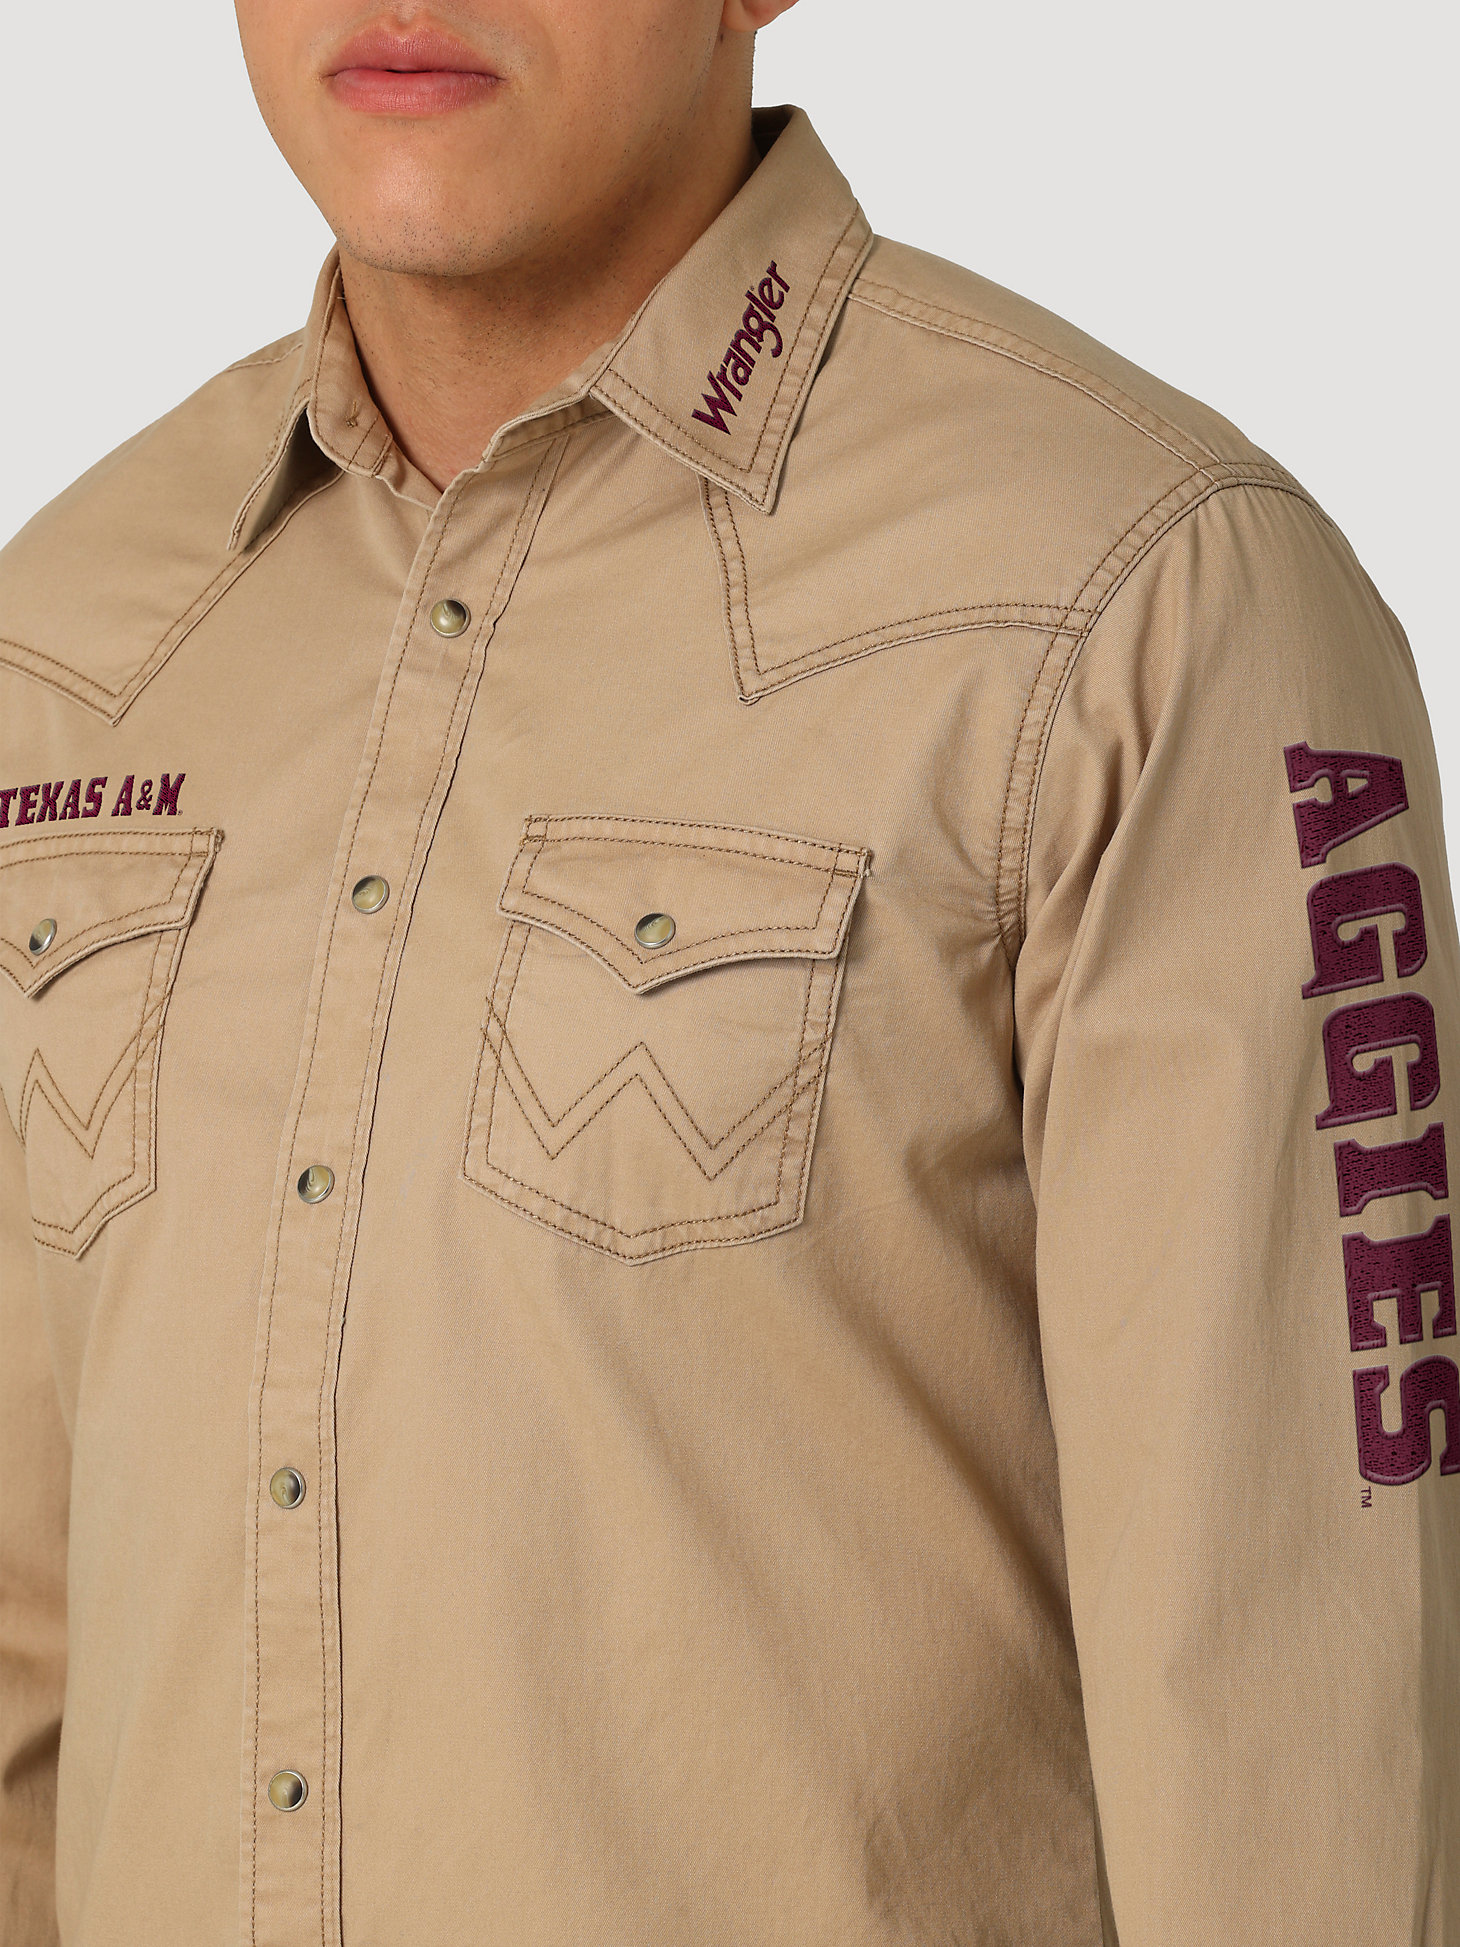 Wrangler Collegiate Embroidered Twill Western Snap Shirt in Texas A&M alternative view 1